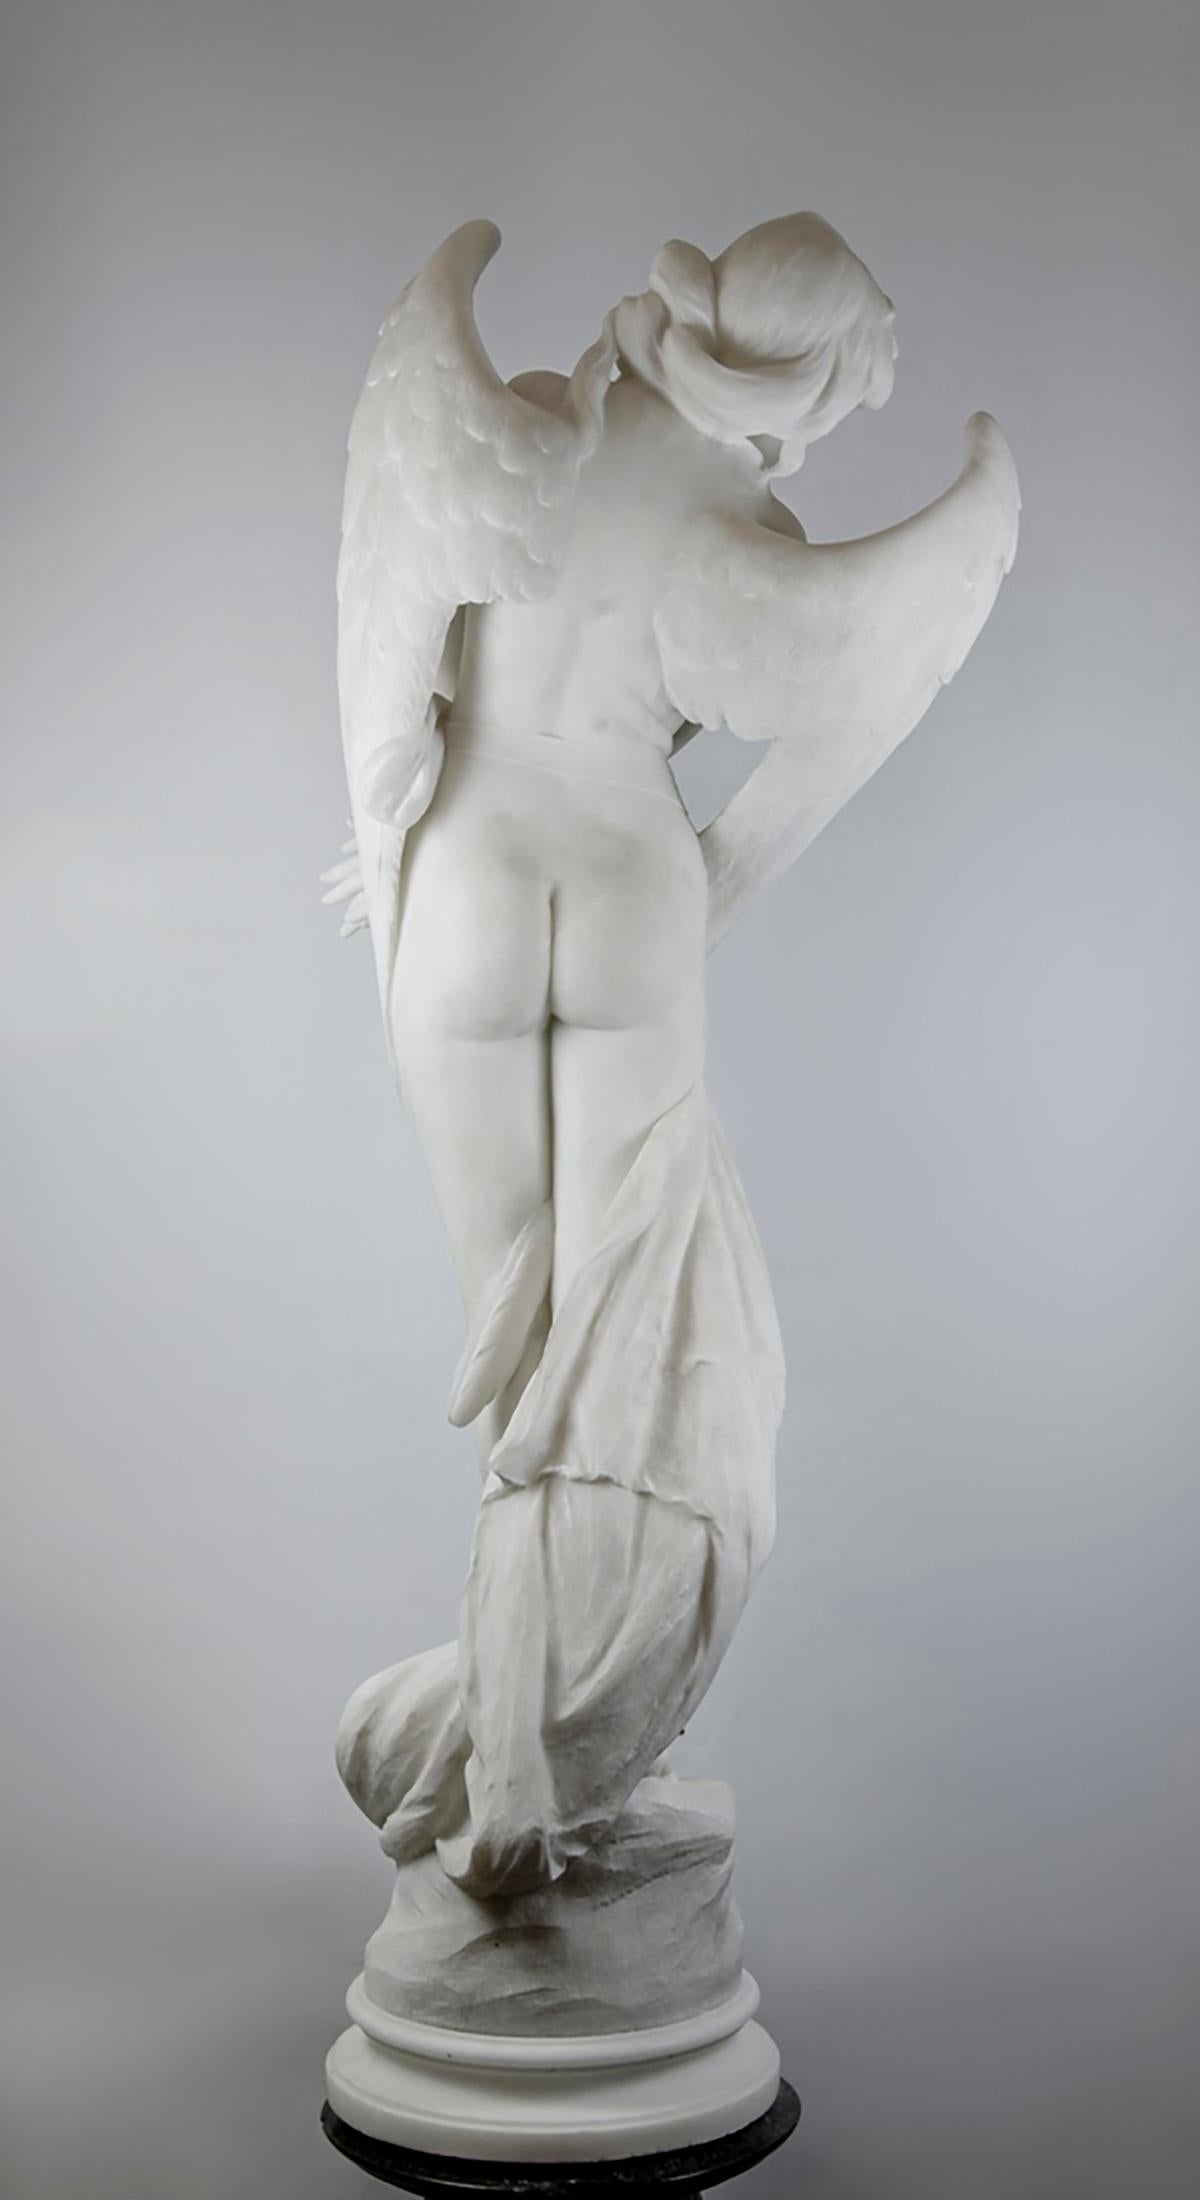 A very fine 19th century Italian Carrara marble sculpture depicting a wonderful angel, original carved marble, by Emilio Fiaschi (Italian, 1858-1941). The intricately carved marble figure of the angel reflects the majesty of the sculpture and the